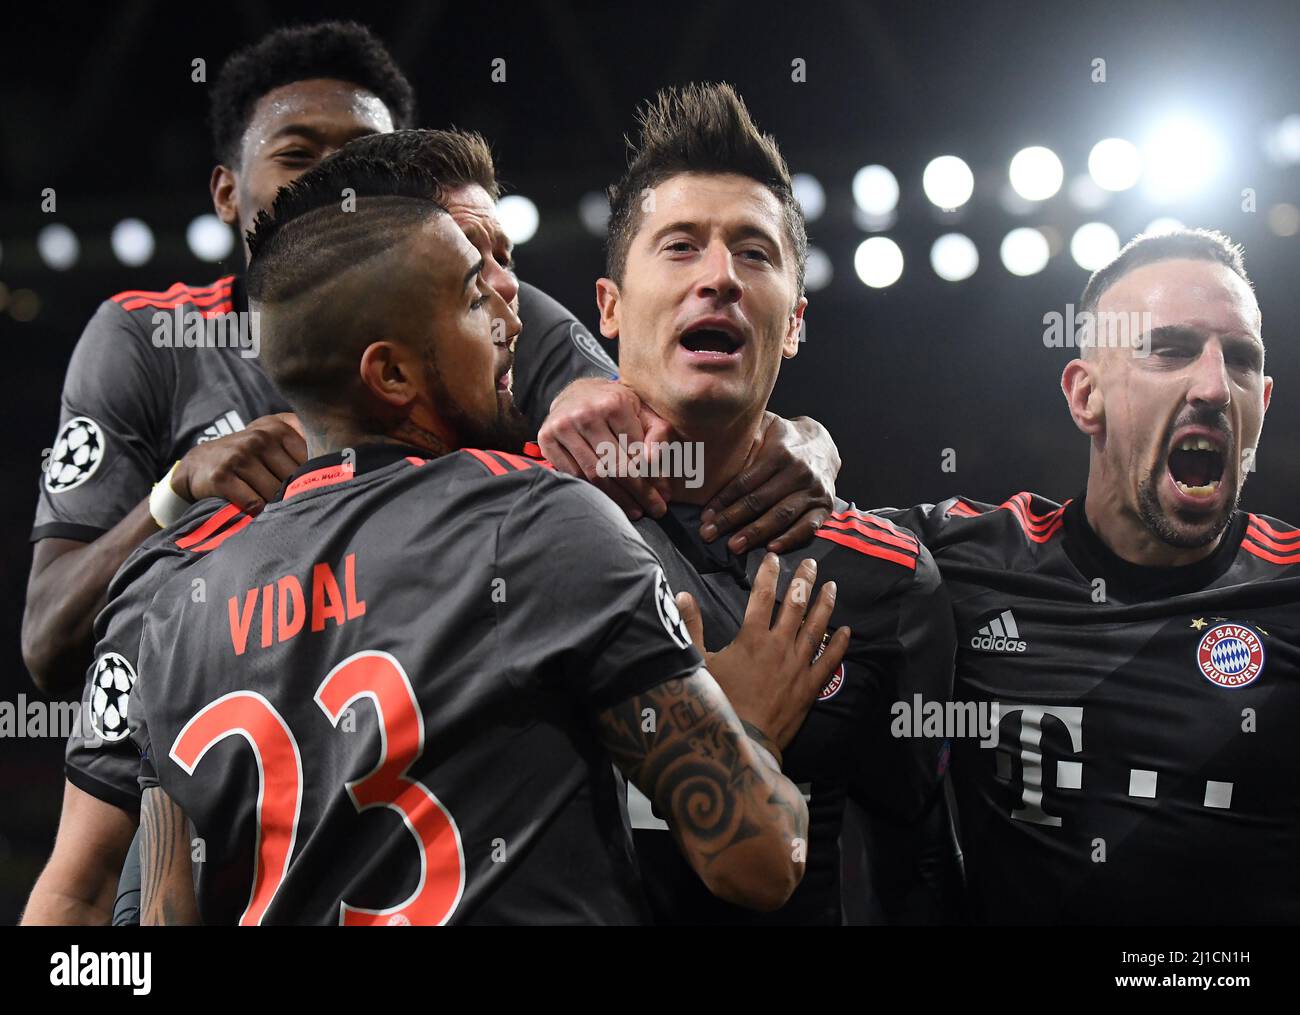 LONDON, ENGLAND - MARCH 7, 2017: Arturo Vidal (L), Franck Ribery (L) celebrate with Robert Lewandowski (C) after he scored a goal during the second leg of the UEFA Champions League Round of 16 game between Arsenal FC and Bayern Munchen at Emirates Stadium. Copyright: Cosmin Iftode/Picstaff Stock Photo